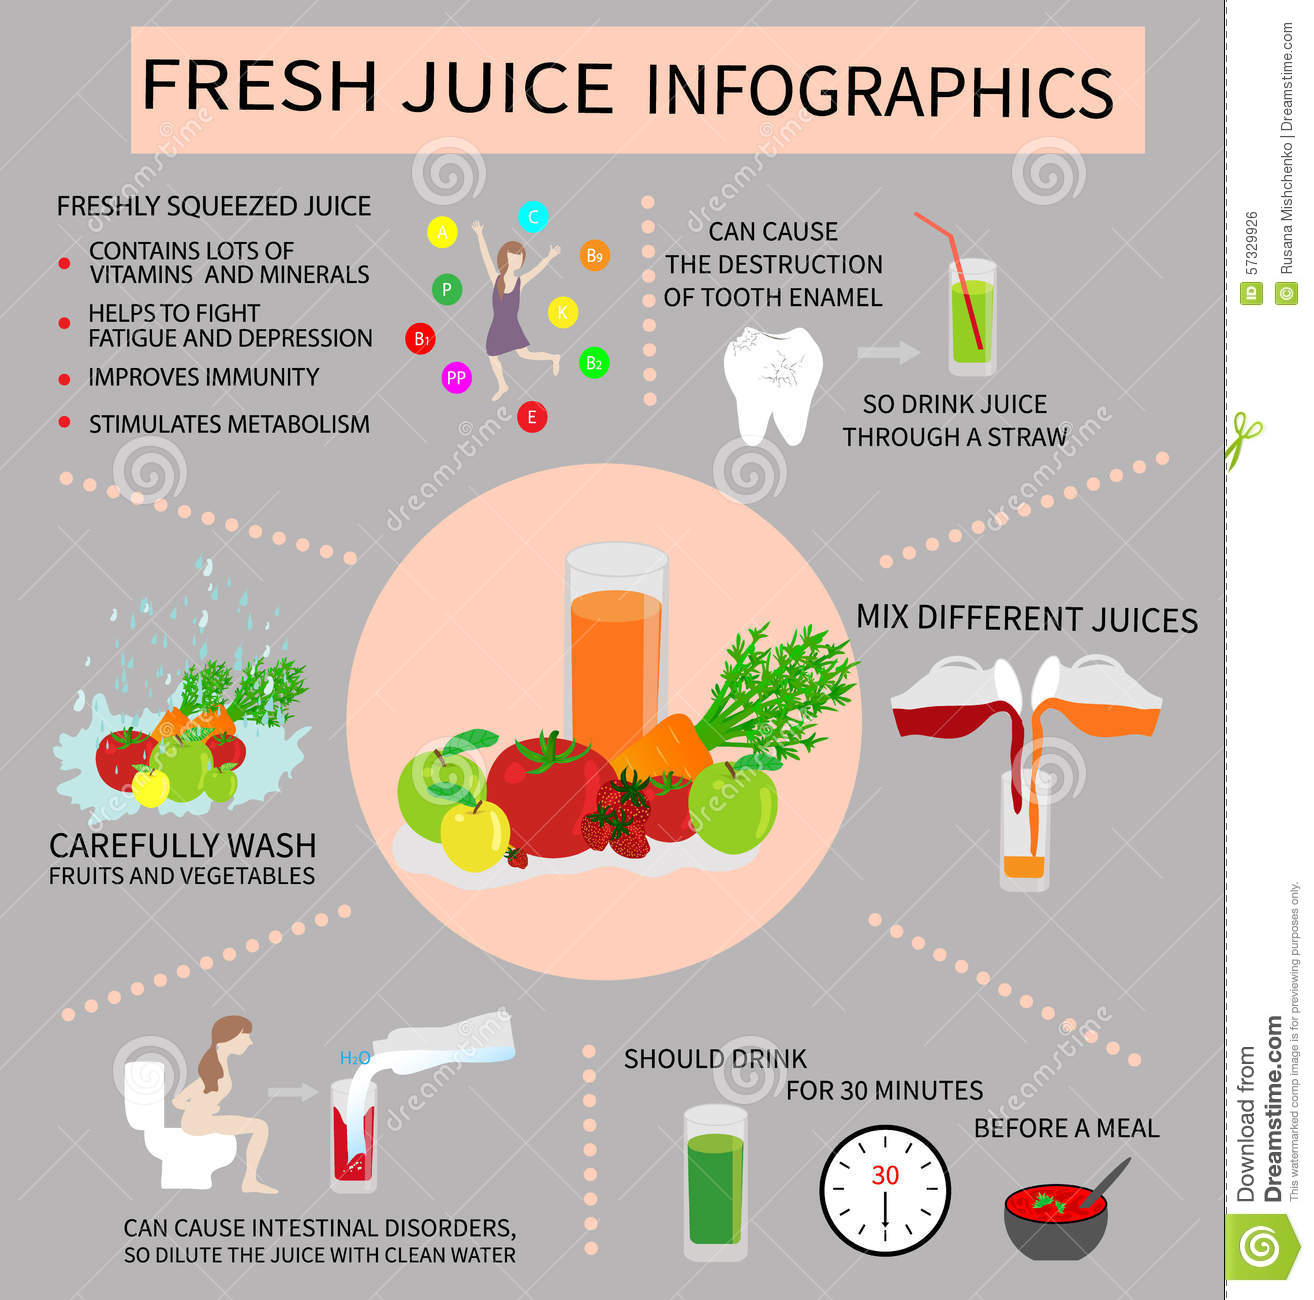 Fresh Juice Infografics On How To Cook And Eat Fresh Juices  Contains    